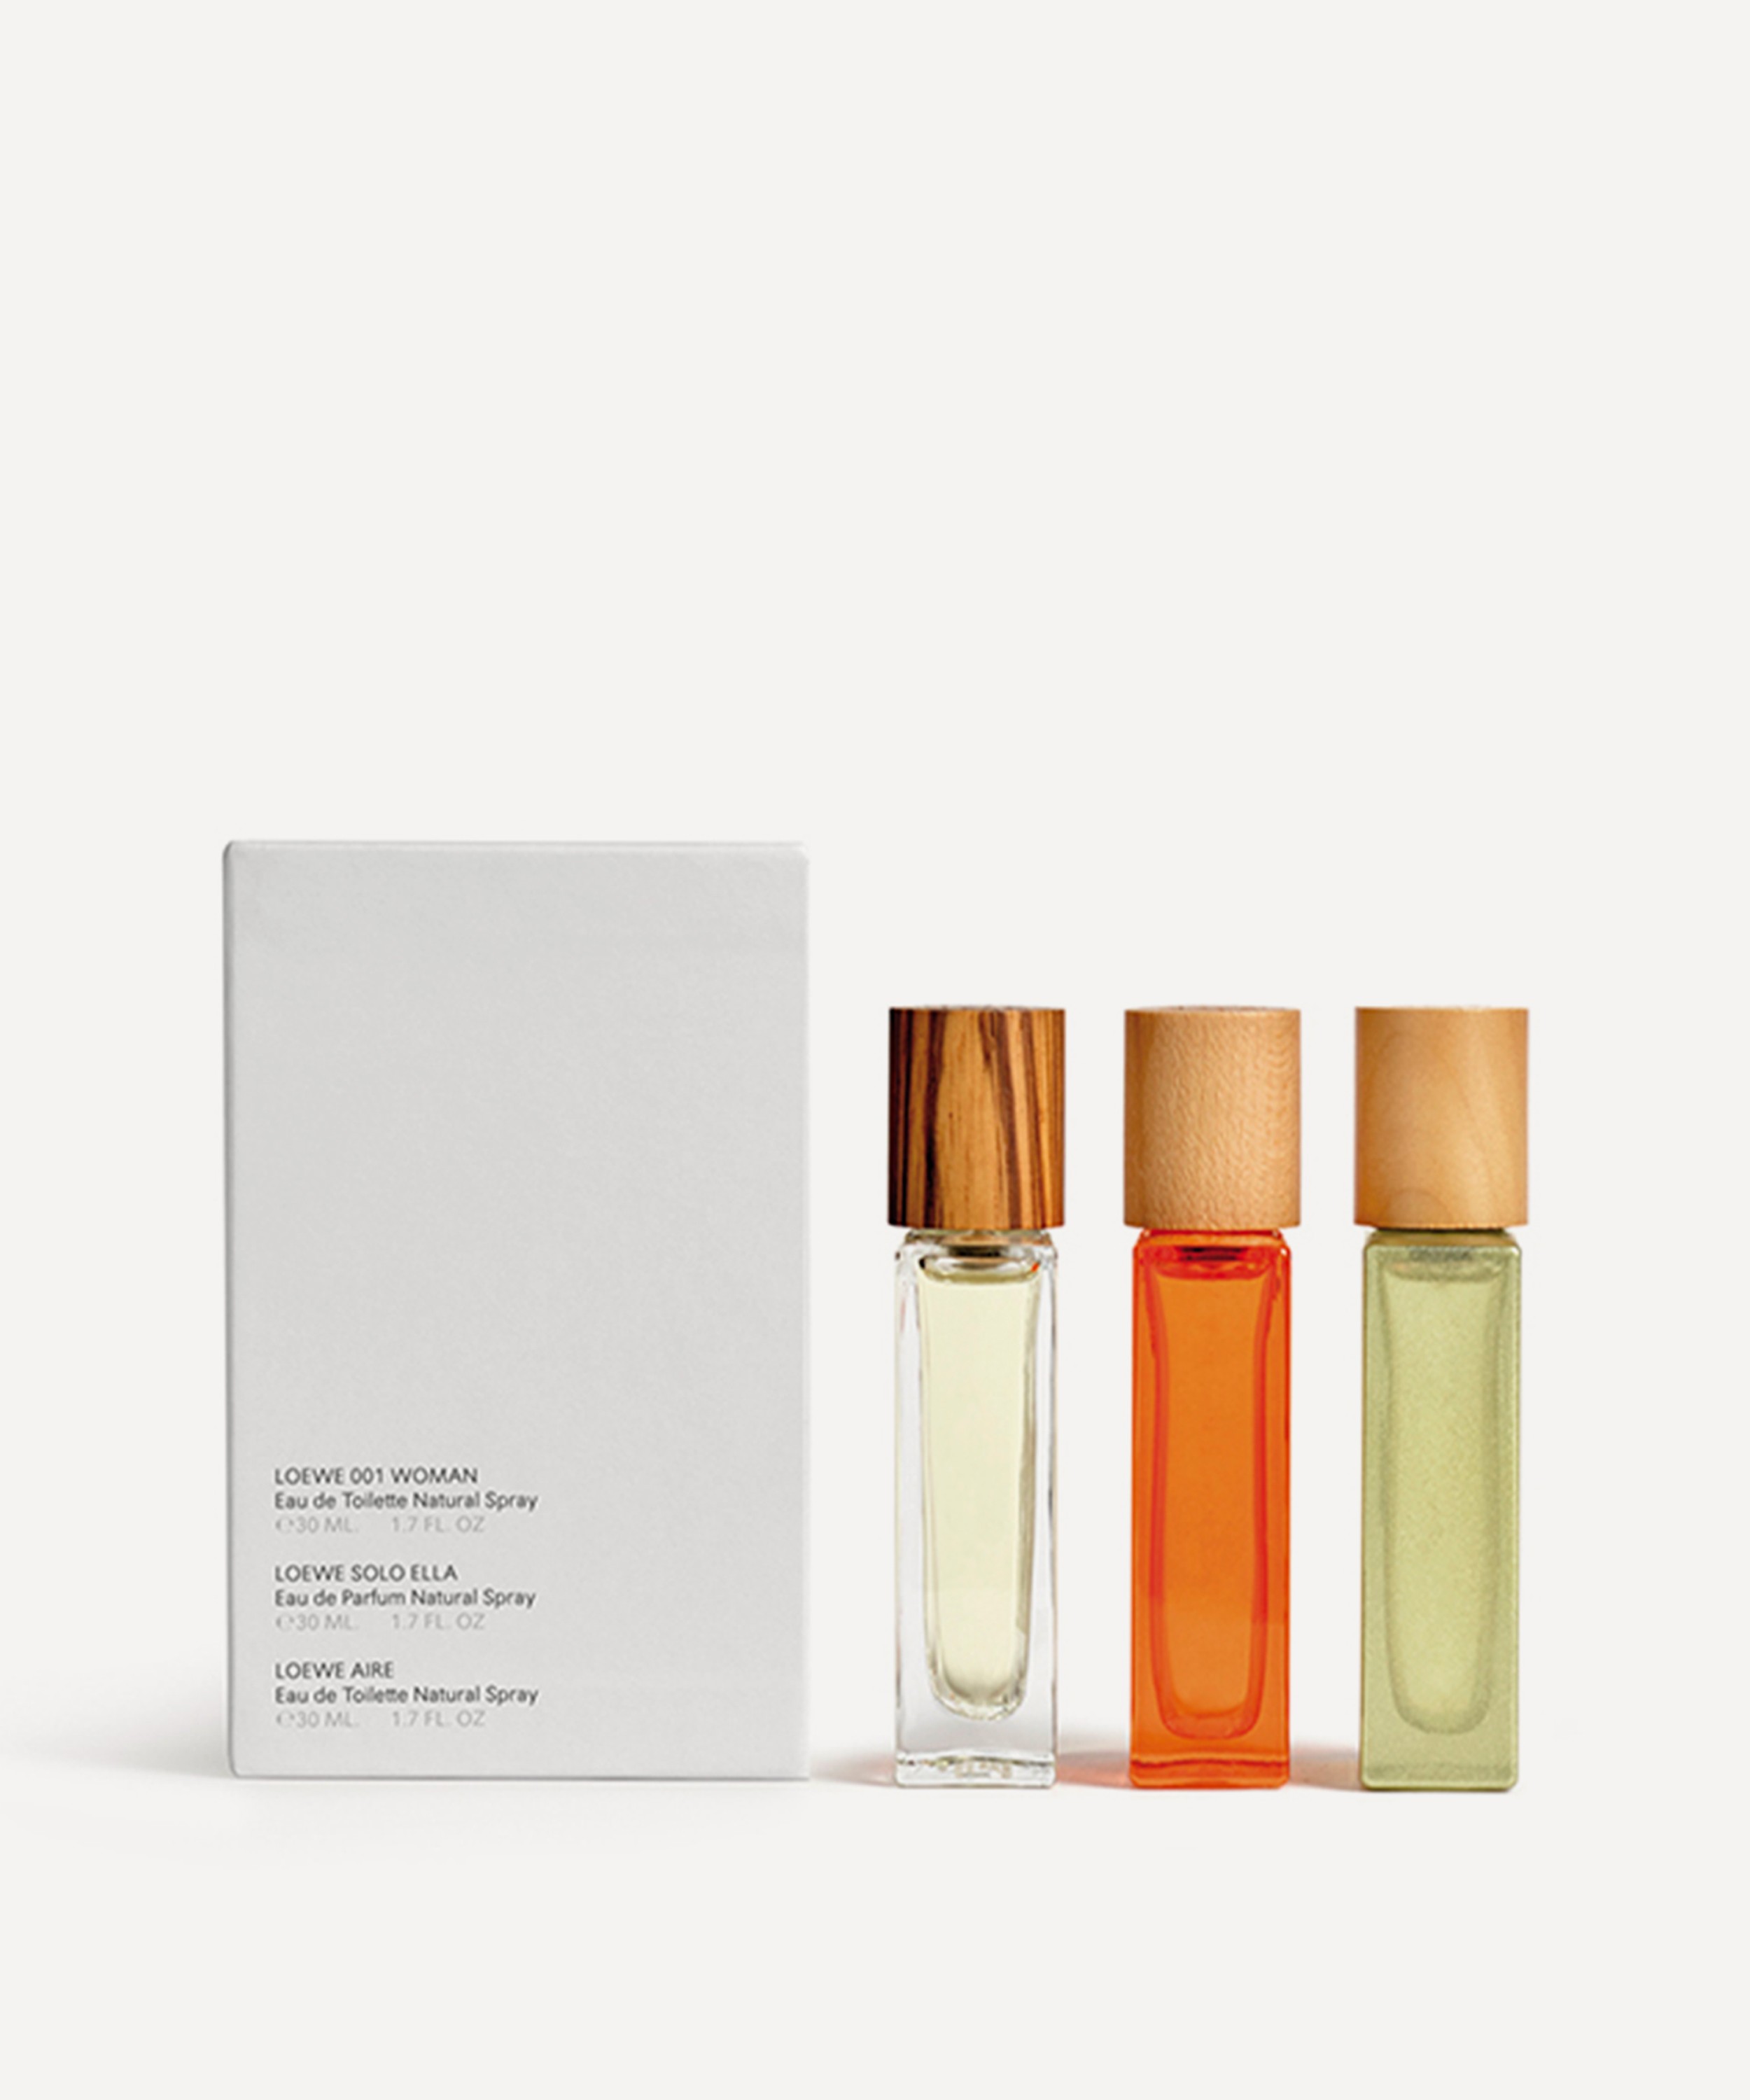 Loewe 001 Woman Aire and Solo Ella Fragrance Trio Set | Liberty